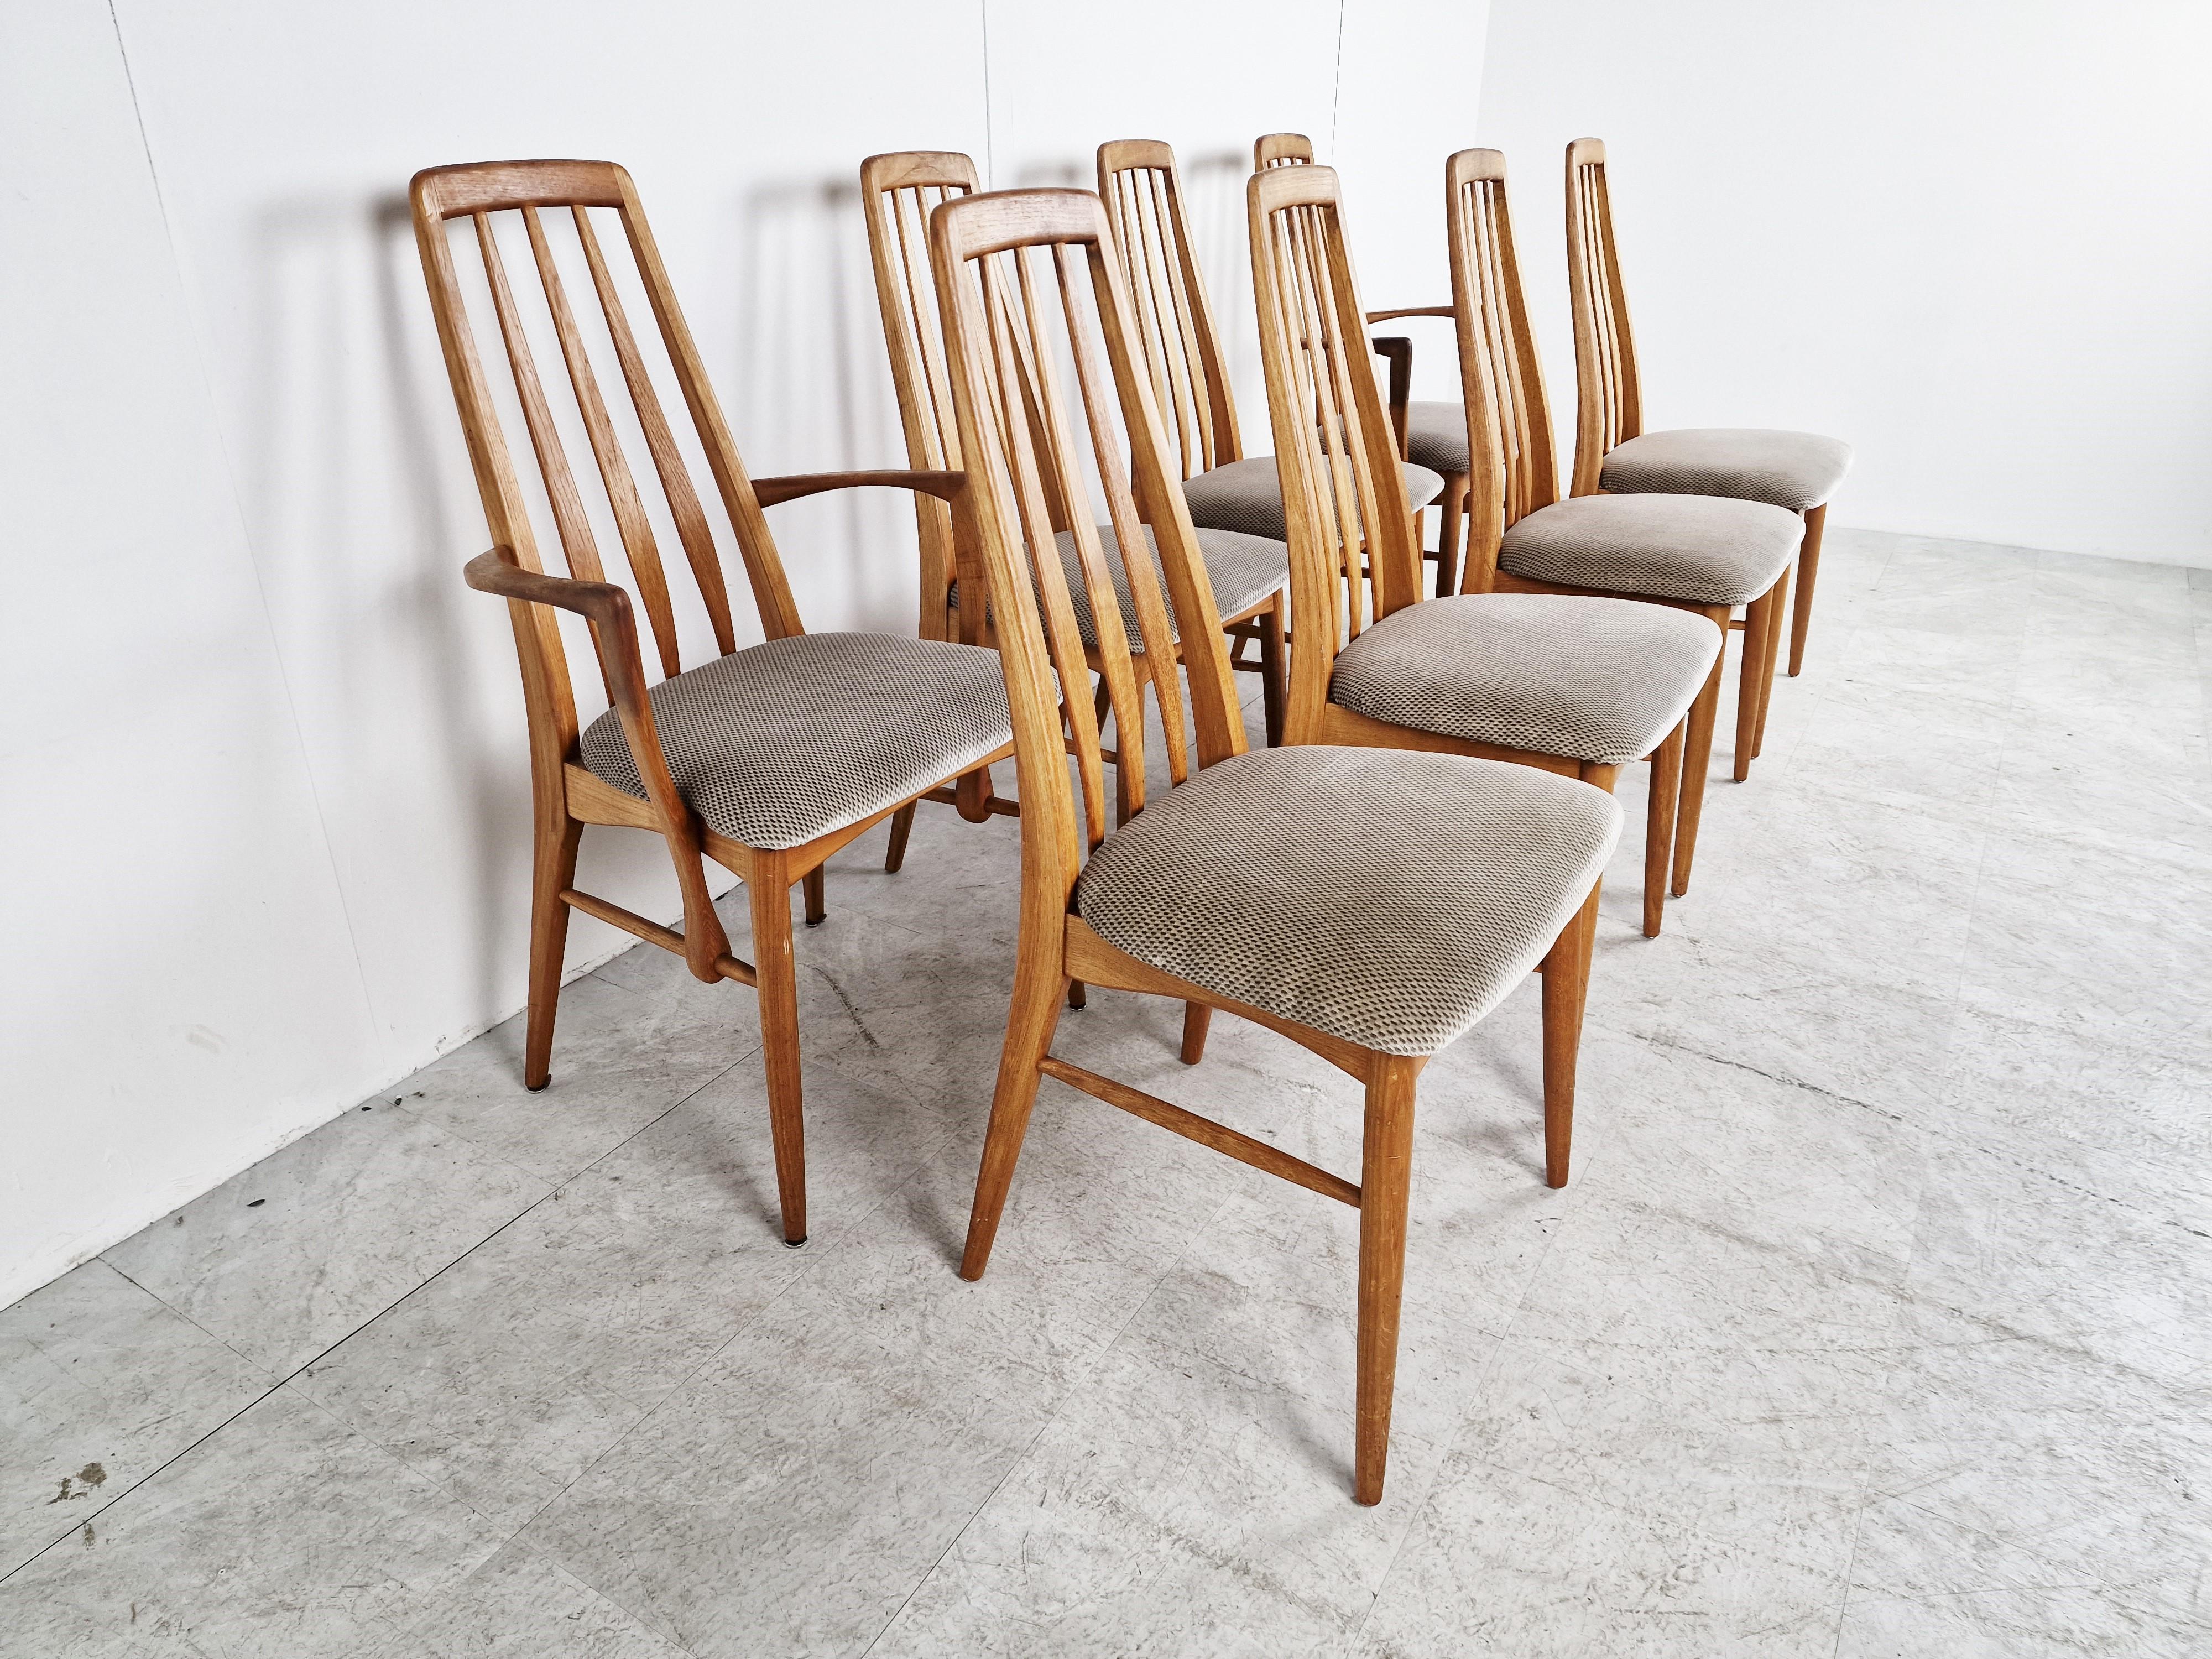 Fabric Set of 6 dining chairs, model EVA by Niels Kofoed, Denmark